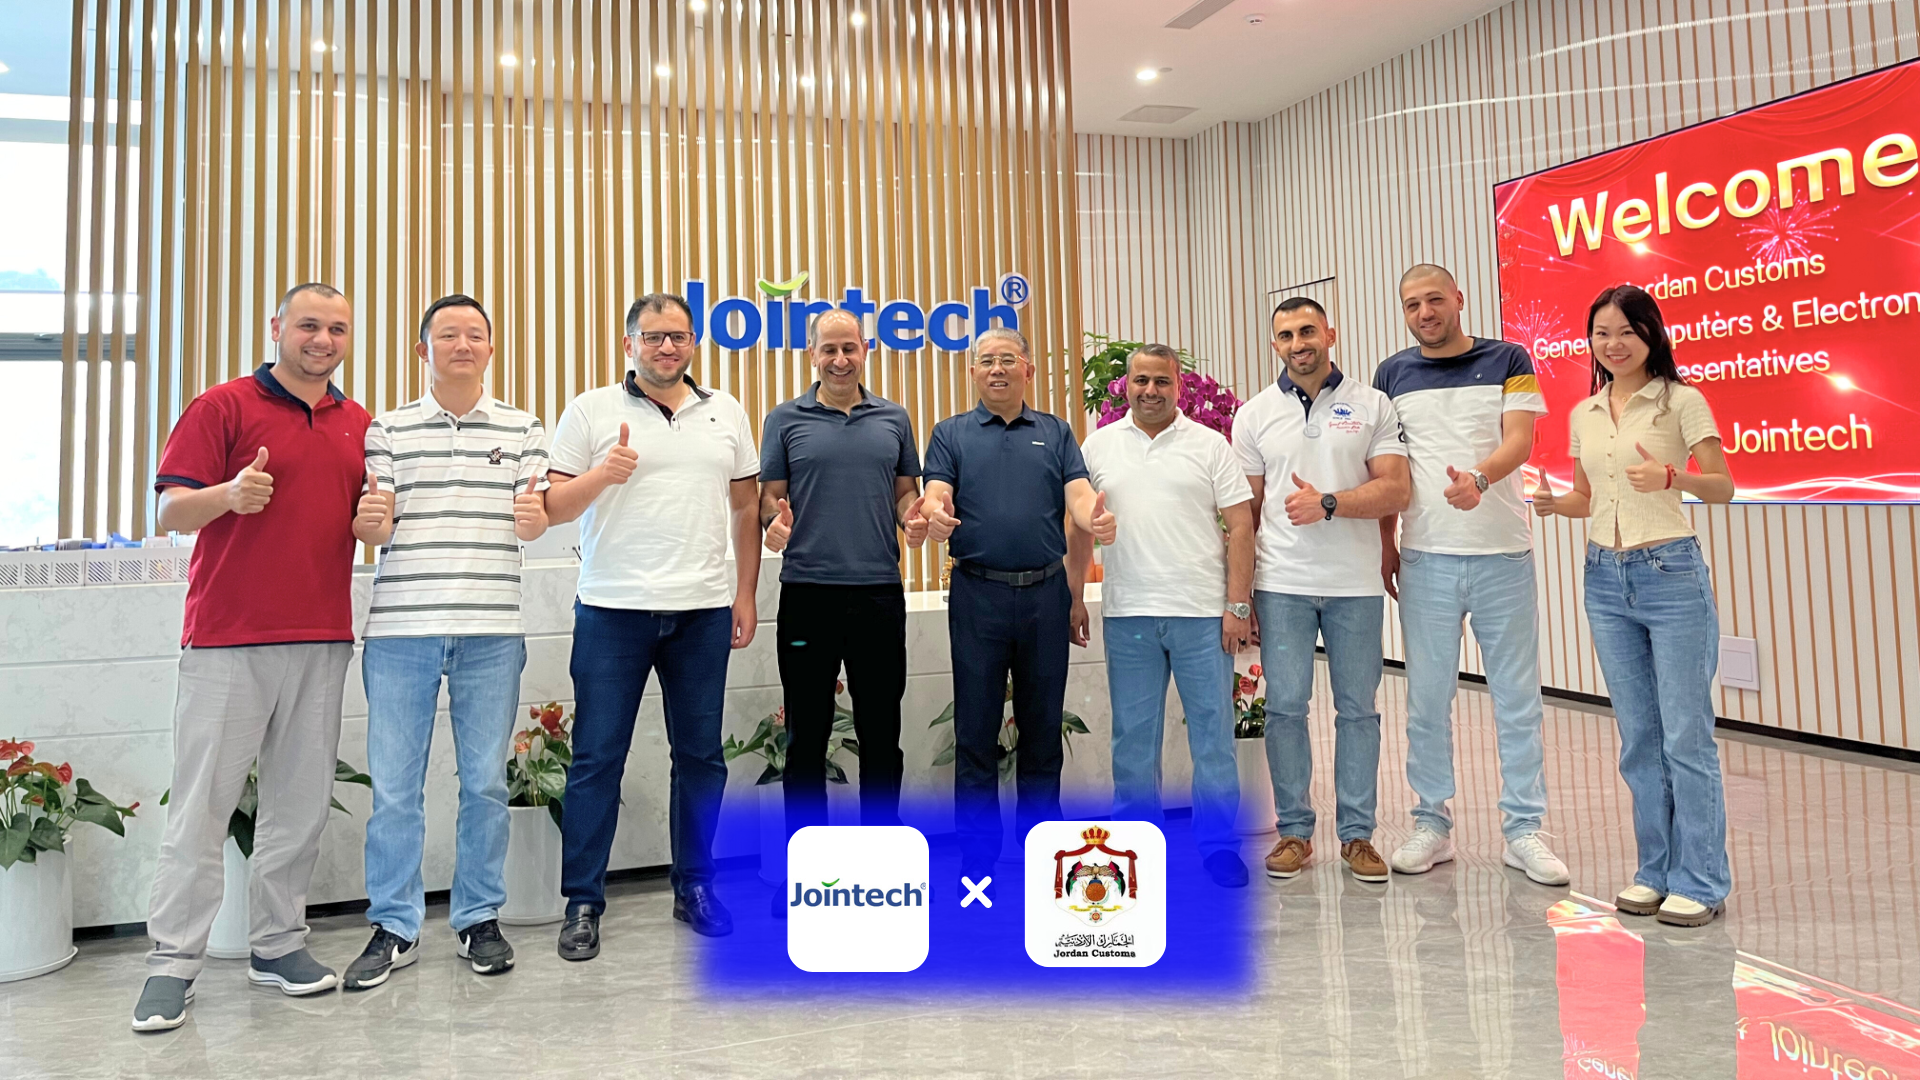 Jointech Successfully Completes Phase II Upgrade Acceptance for Jordan Customs ECTS Project